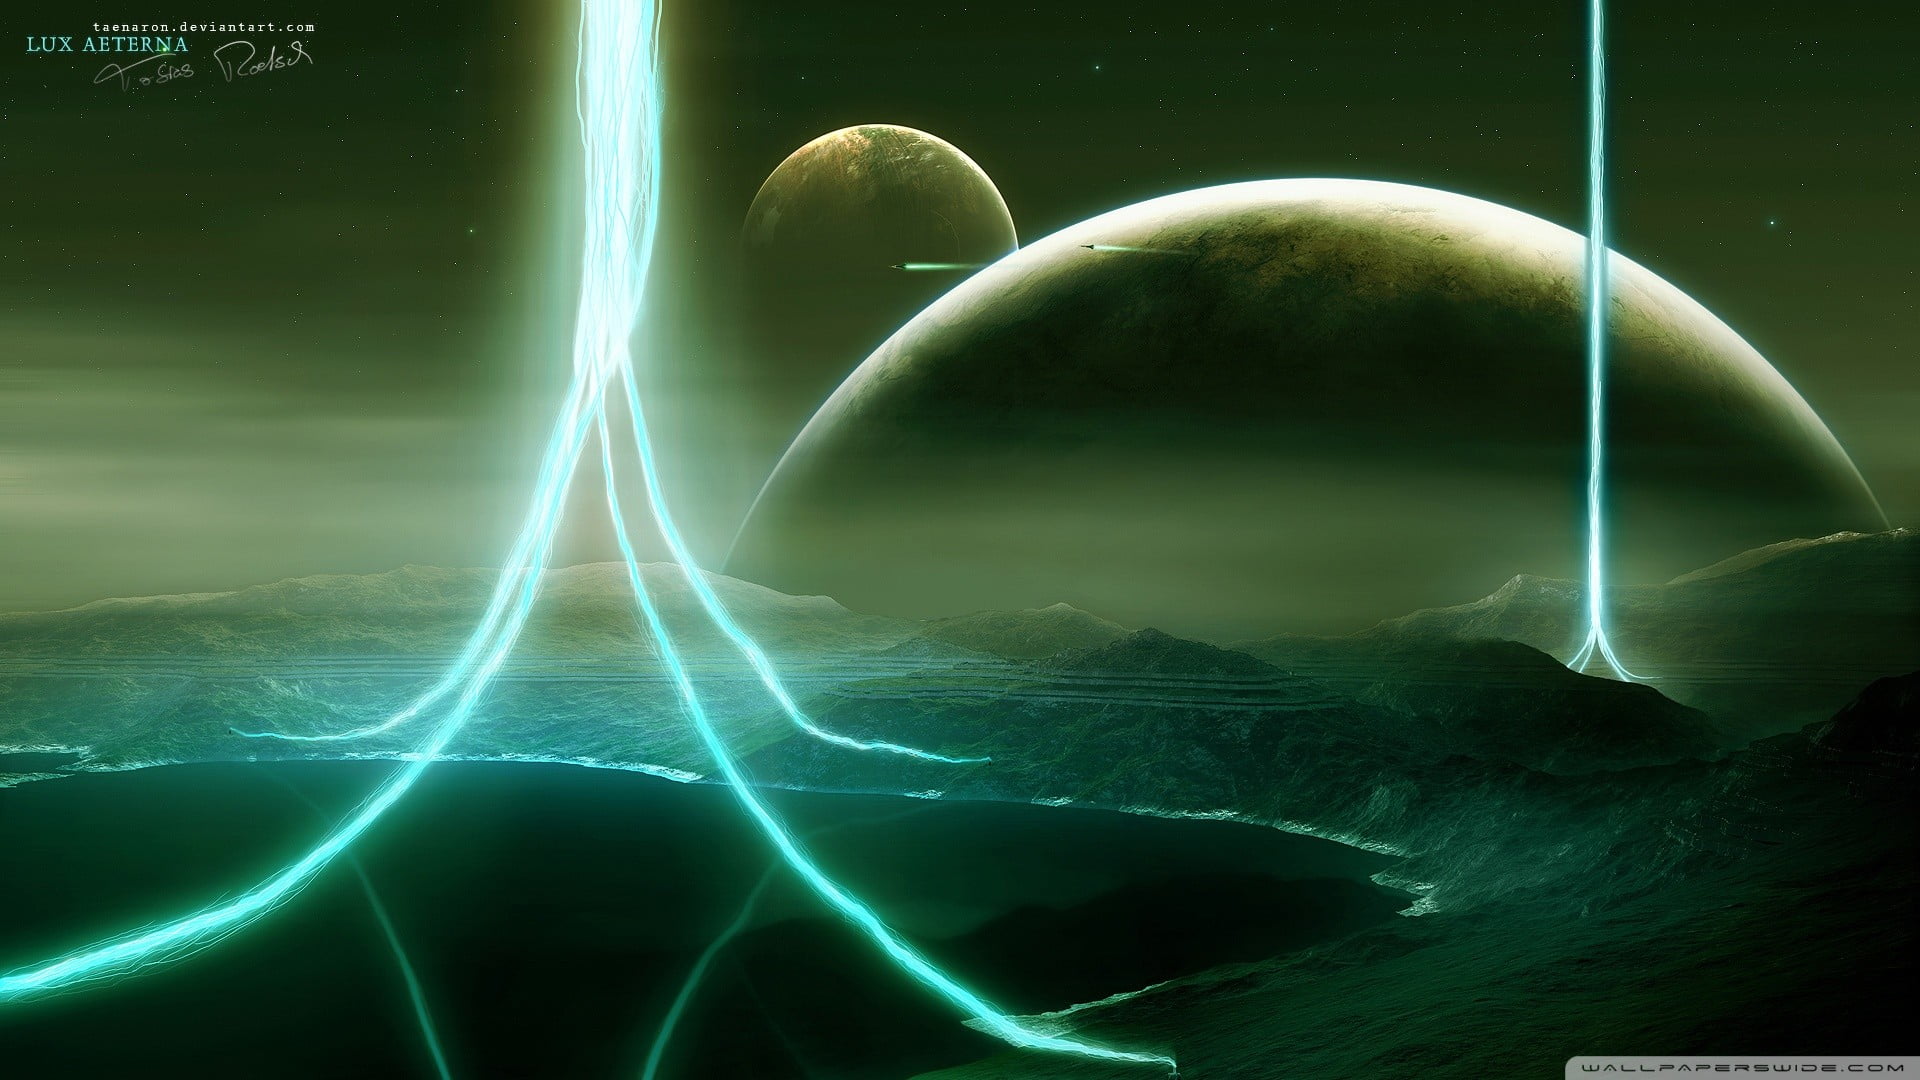 mountain and moon digital wallpaper, Vitaly S Alexius, space art, planet